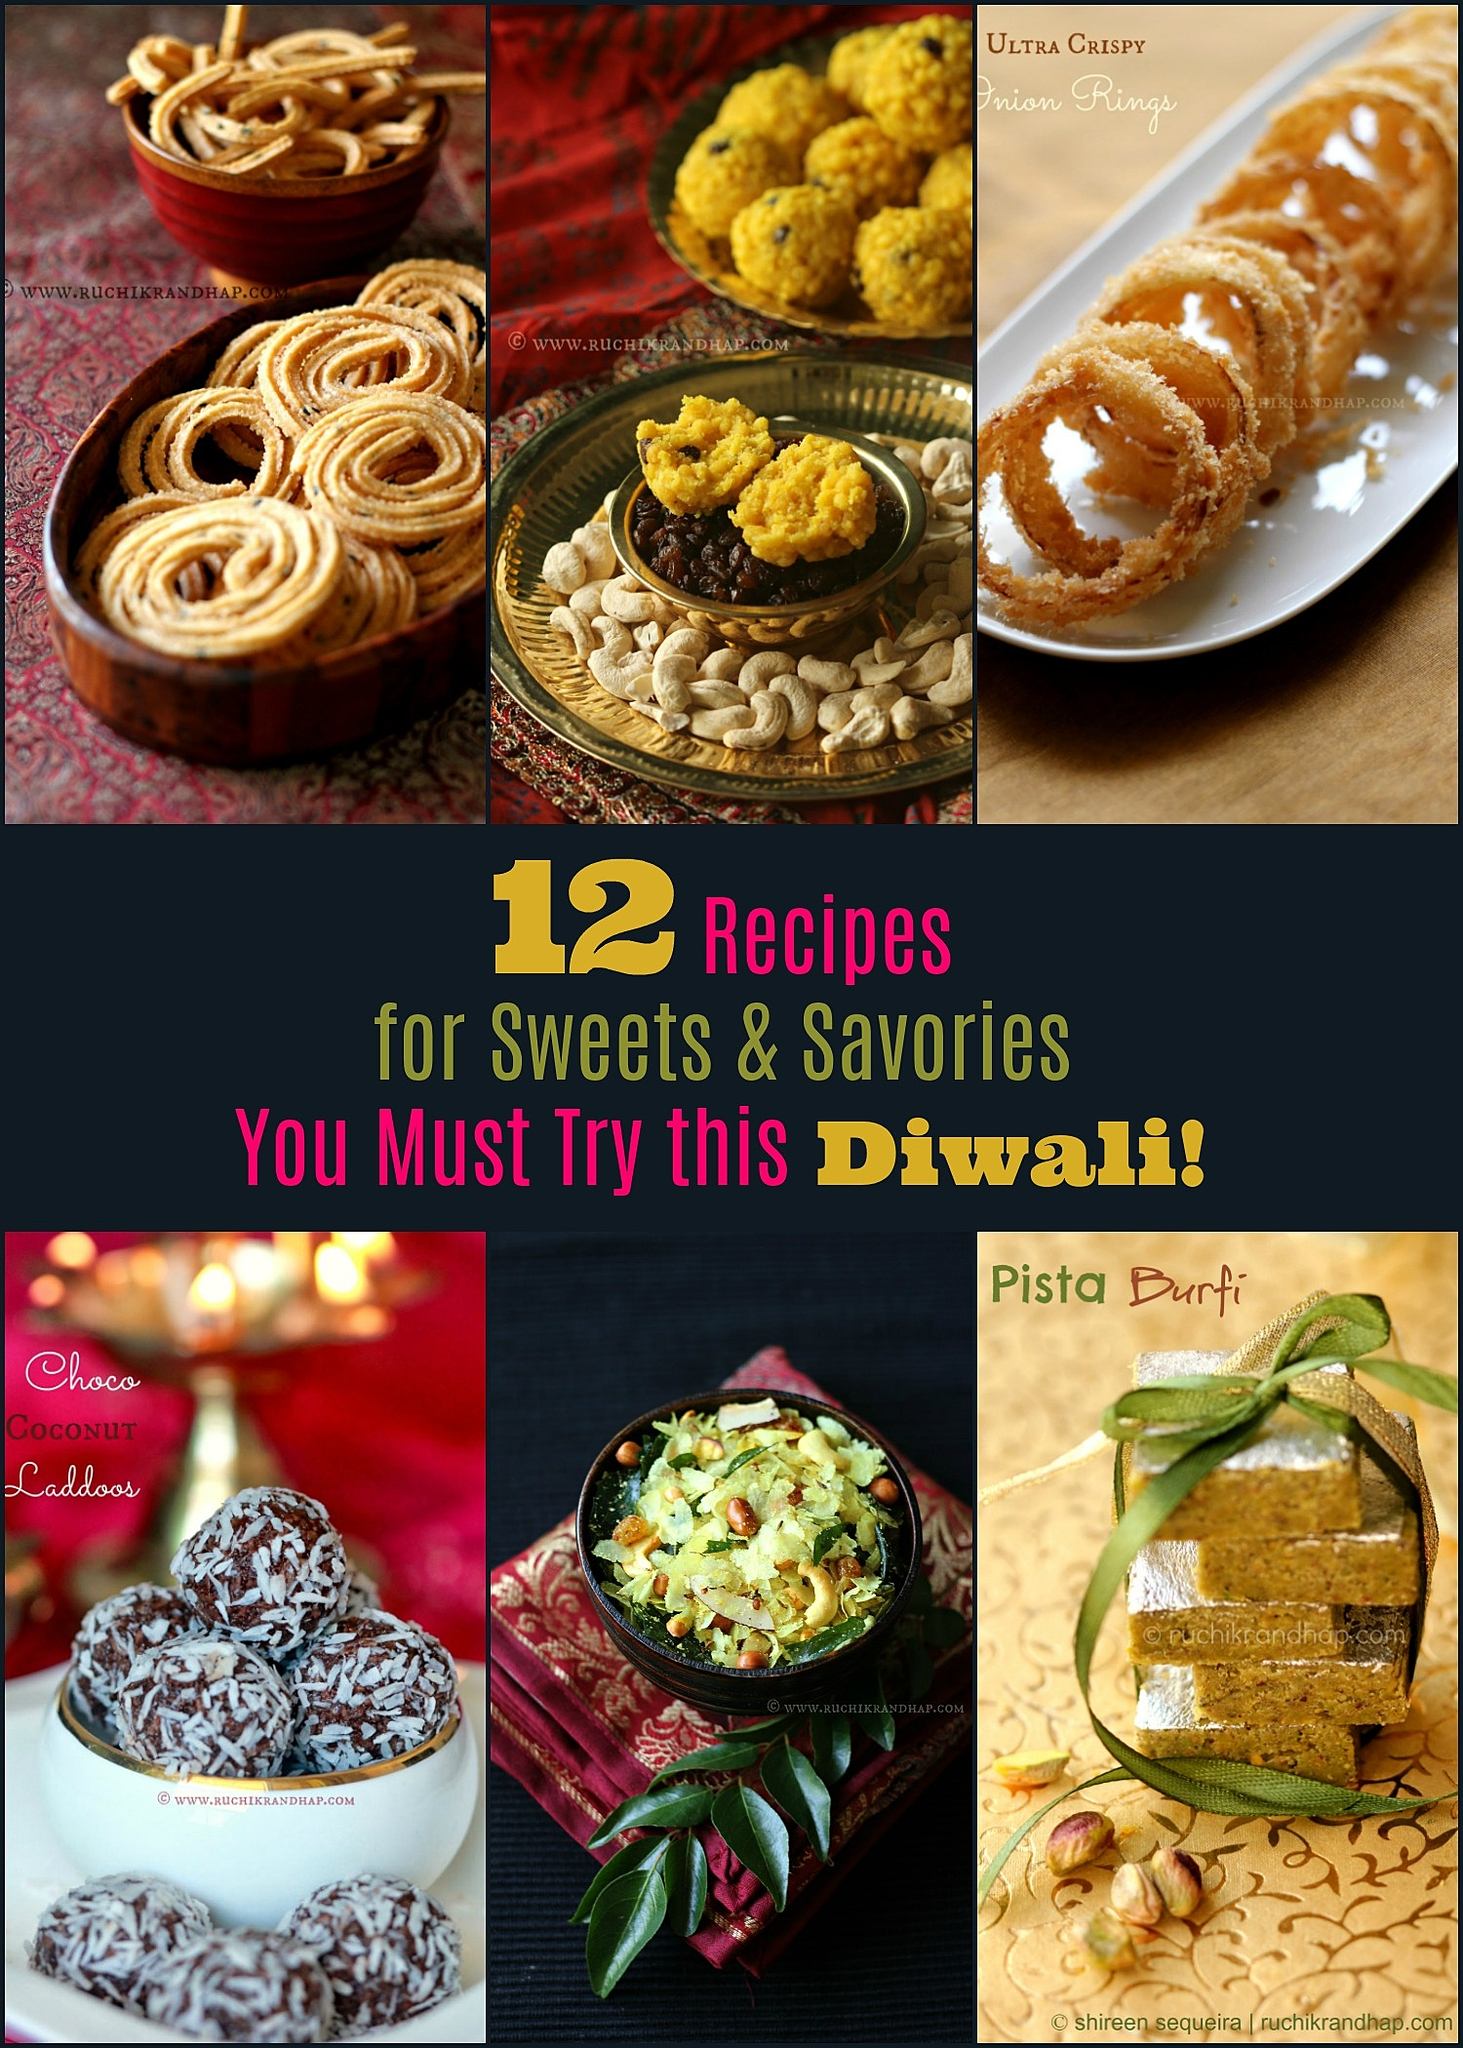 12 recipes for sweets & savories you must try this diwali!